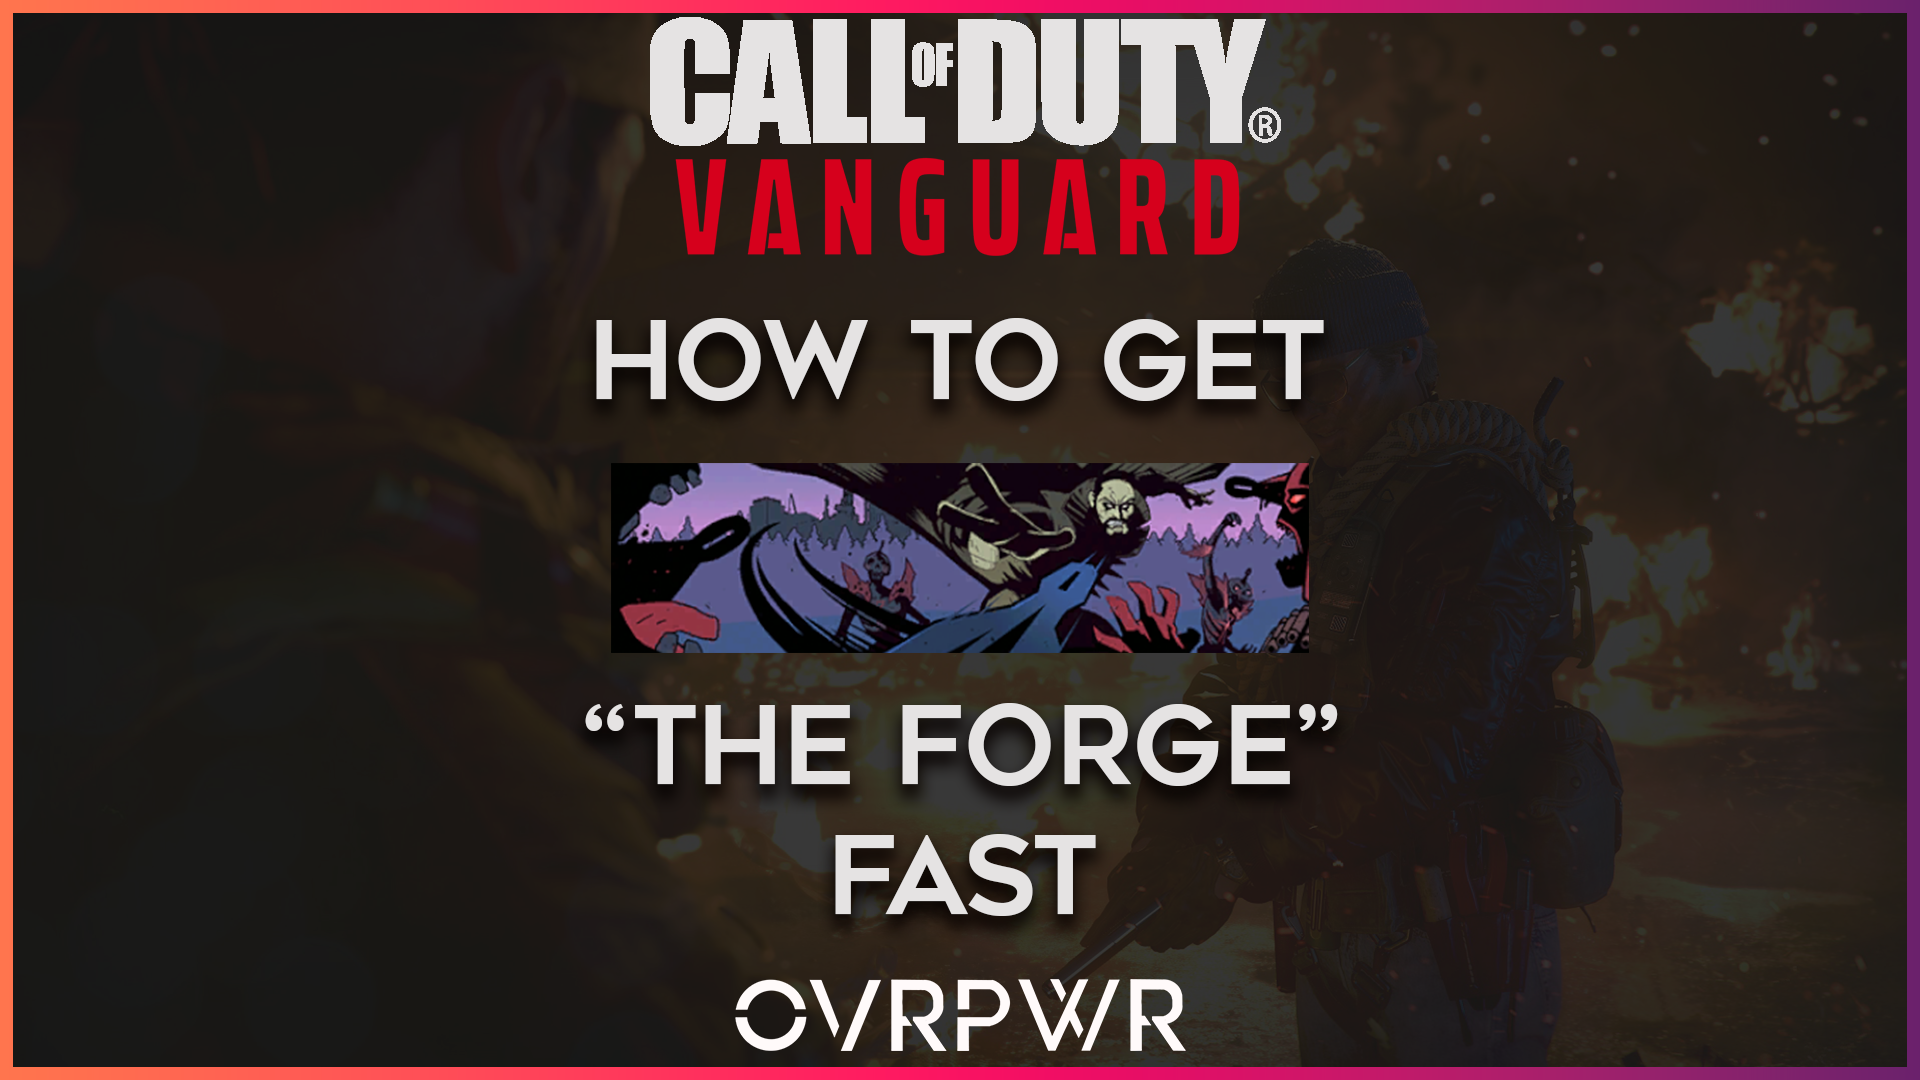 How to get The Forge calling card in Call of Duty Vanguard